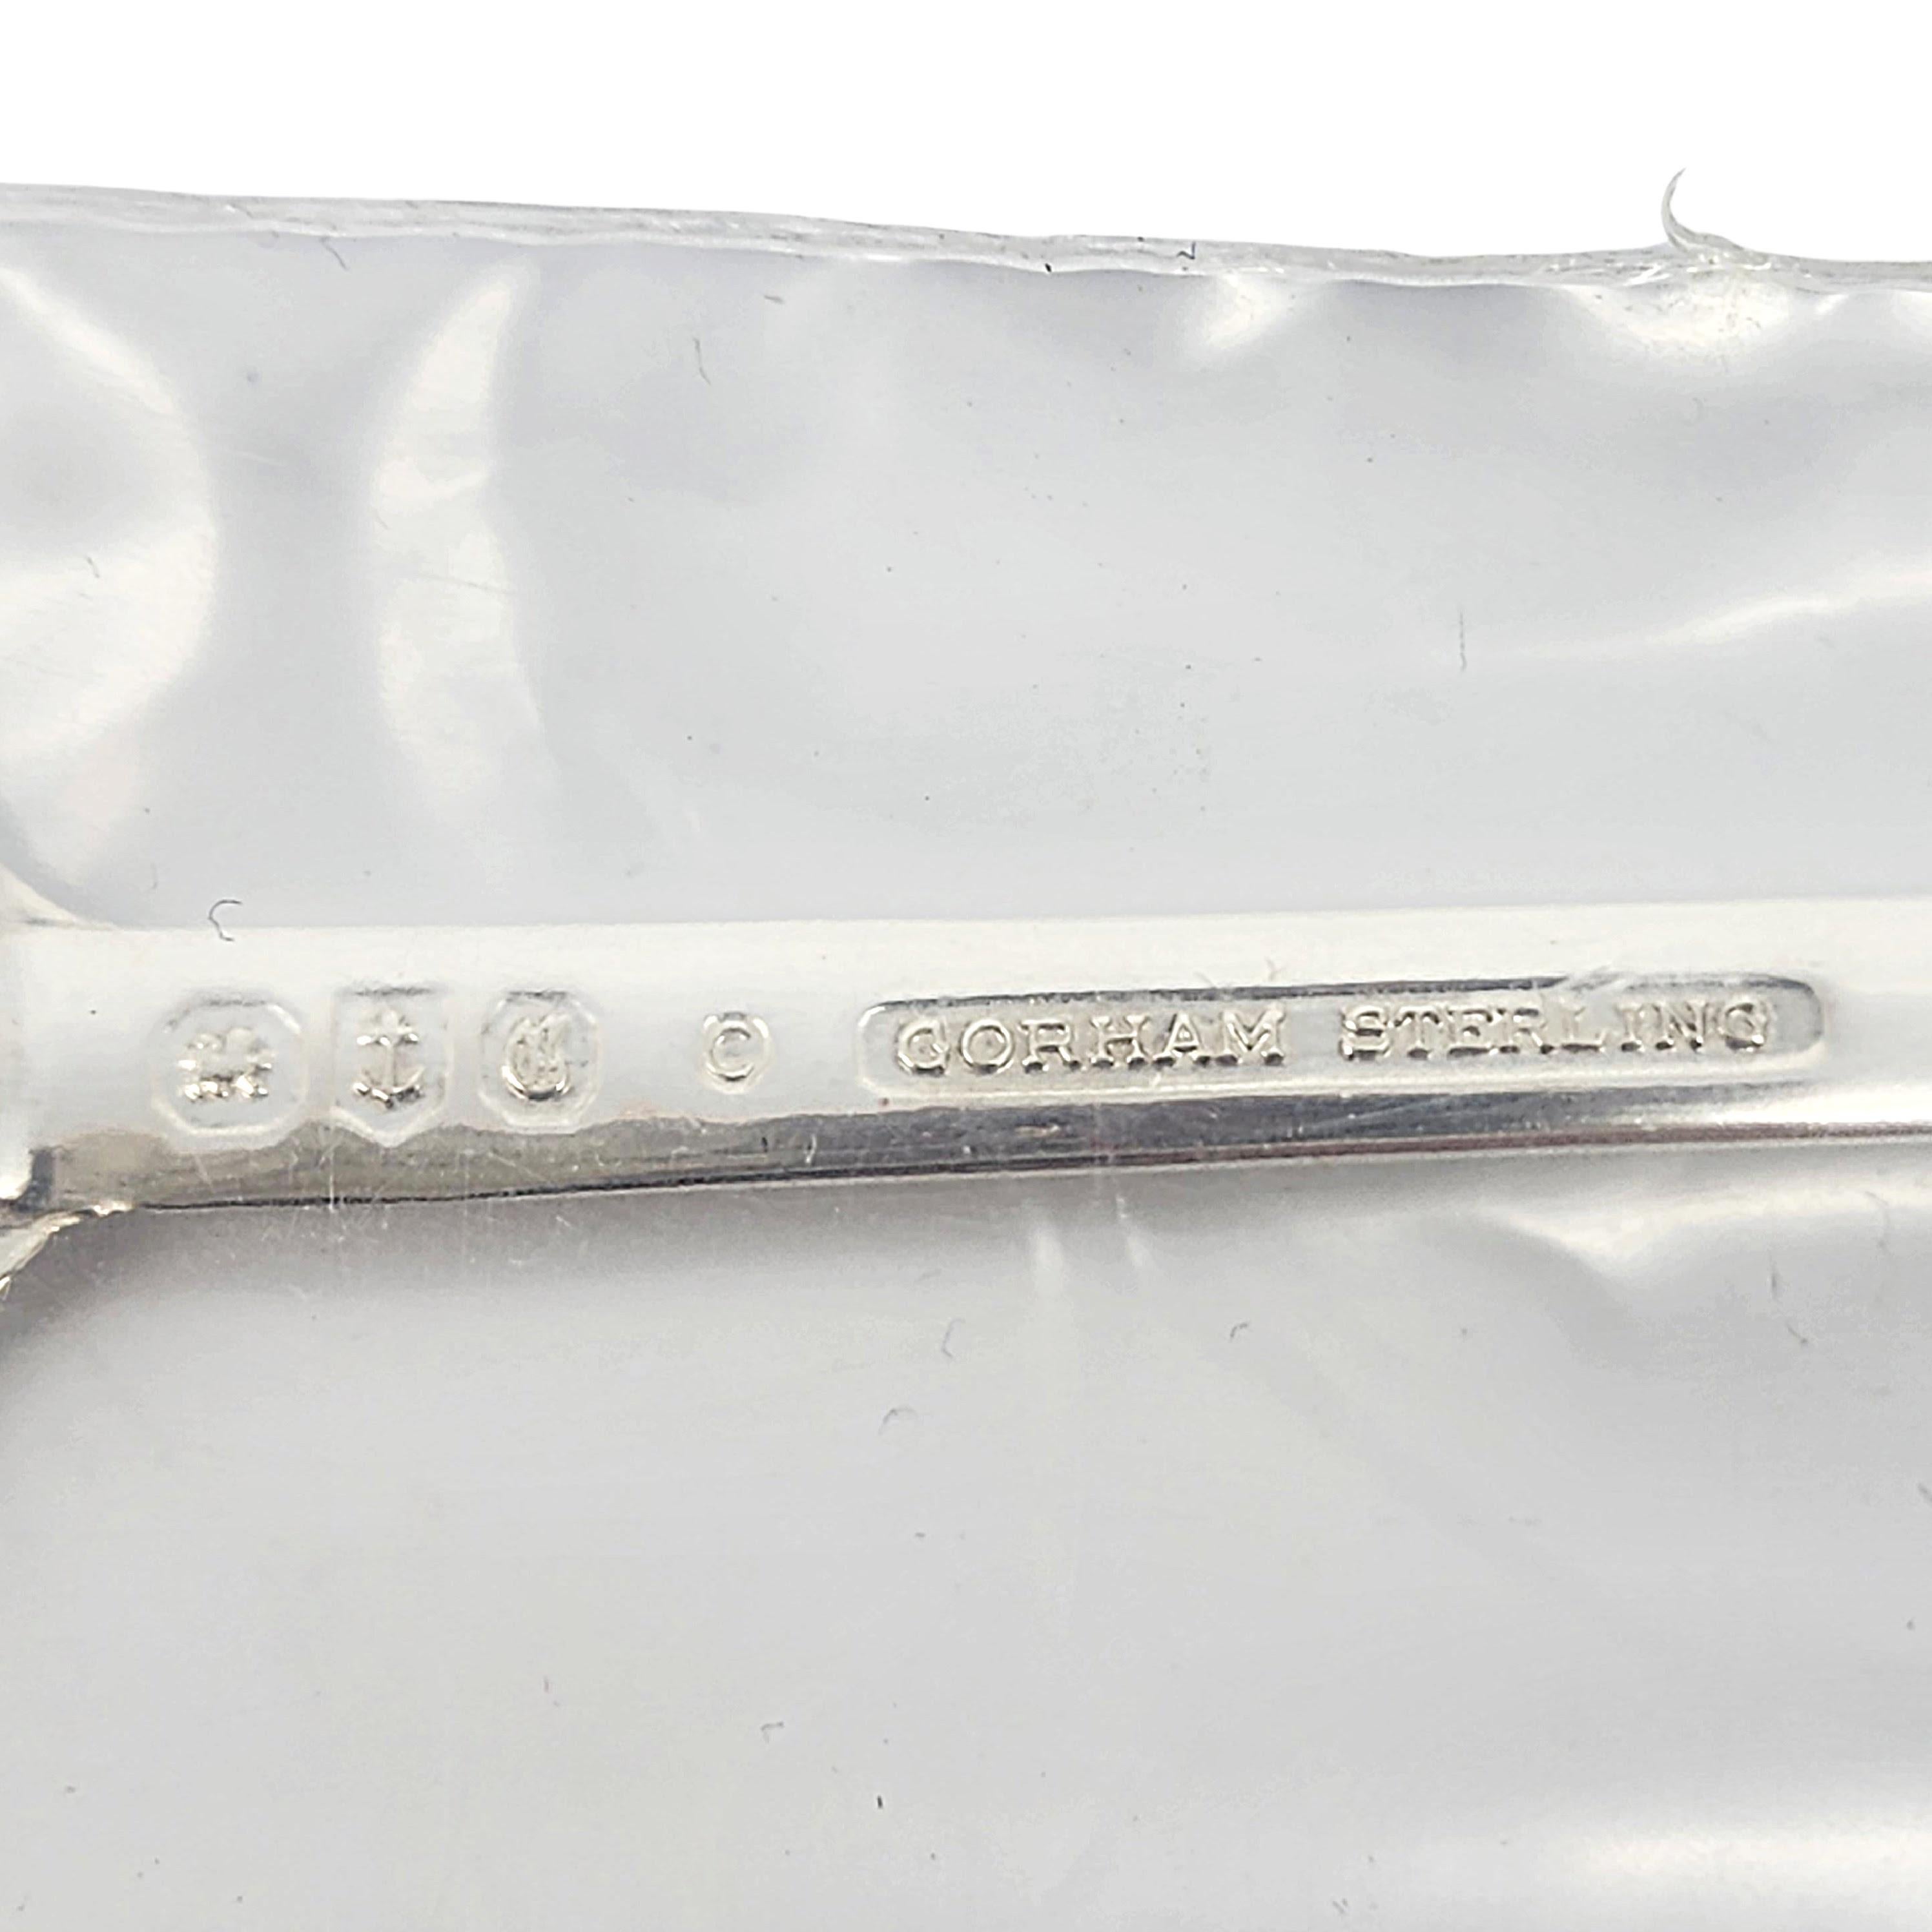 Gorham Sterling Silver 1977 Christmas Spoon Sealed with Box #15798 For Sale 2